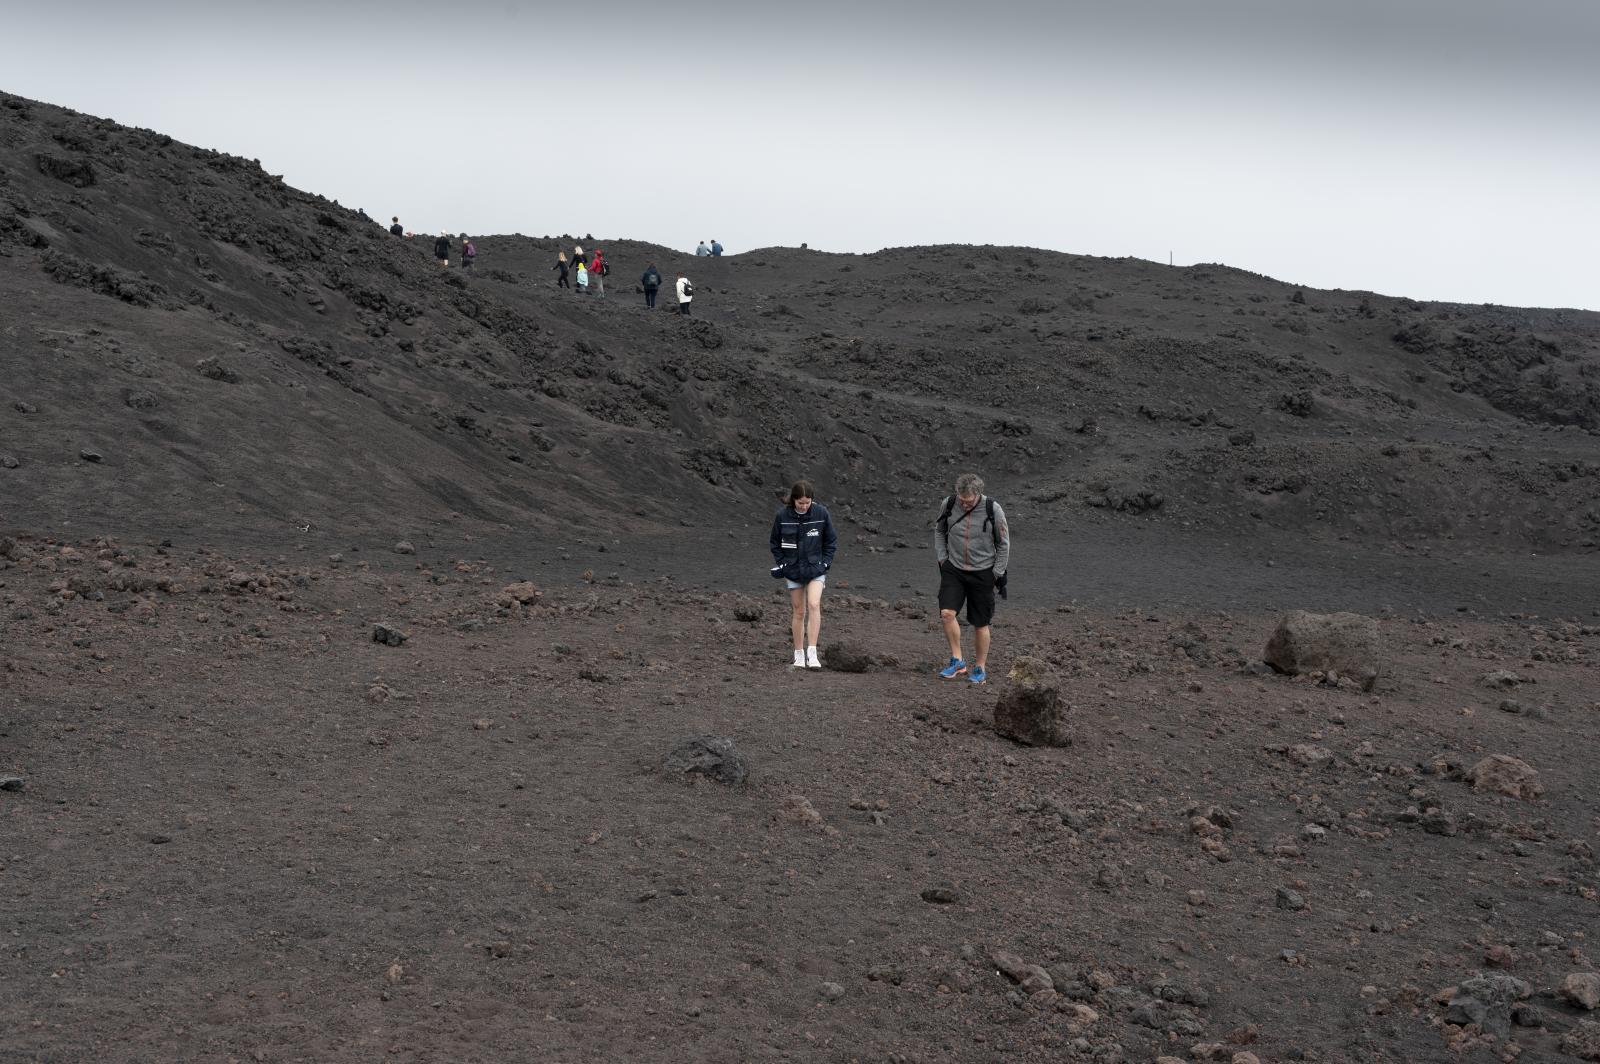 Etna (Sicily), 3357 meters above sea level. A piece of Mars on Earth